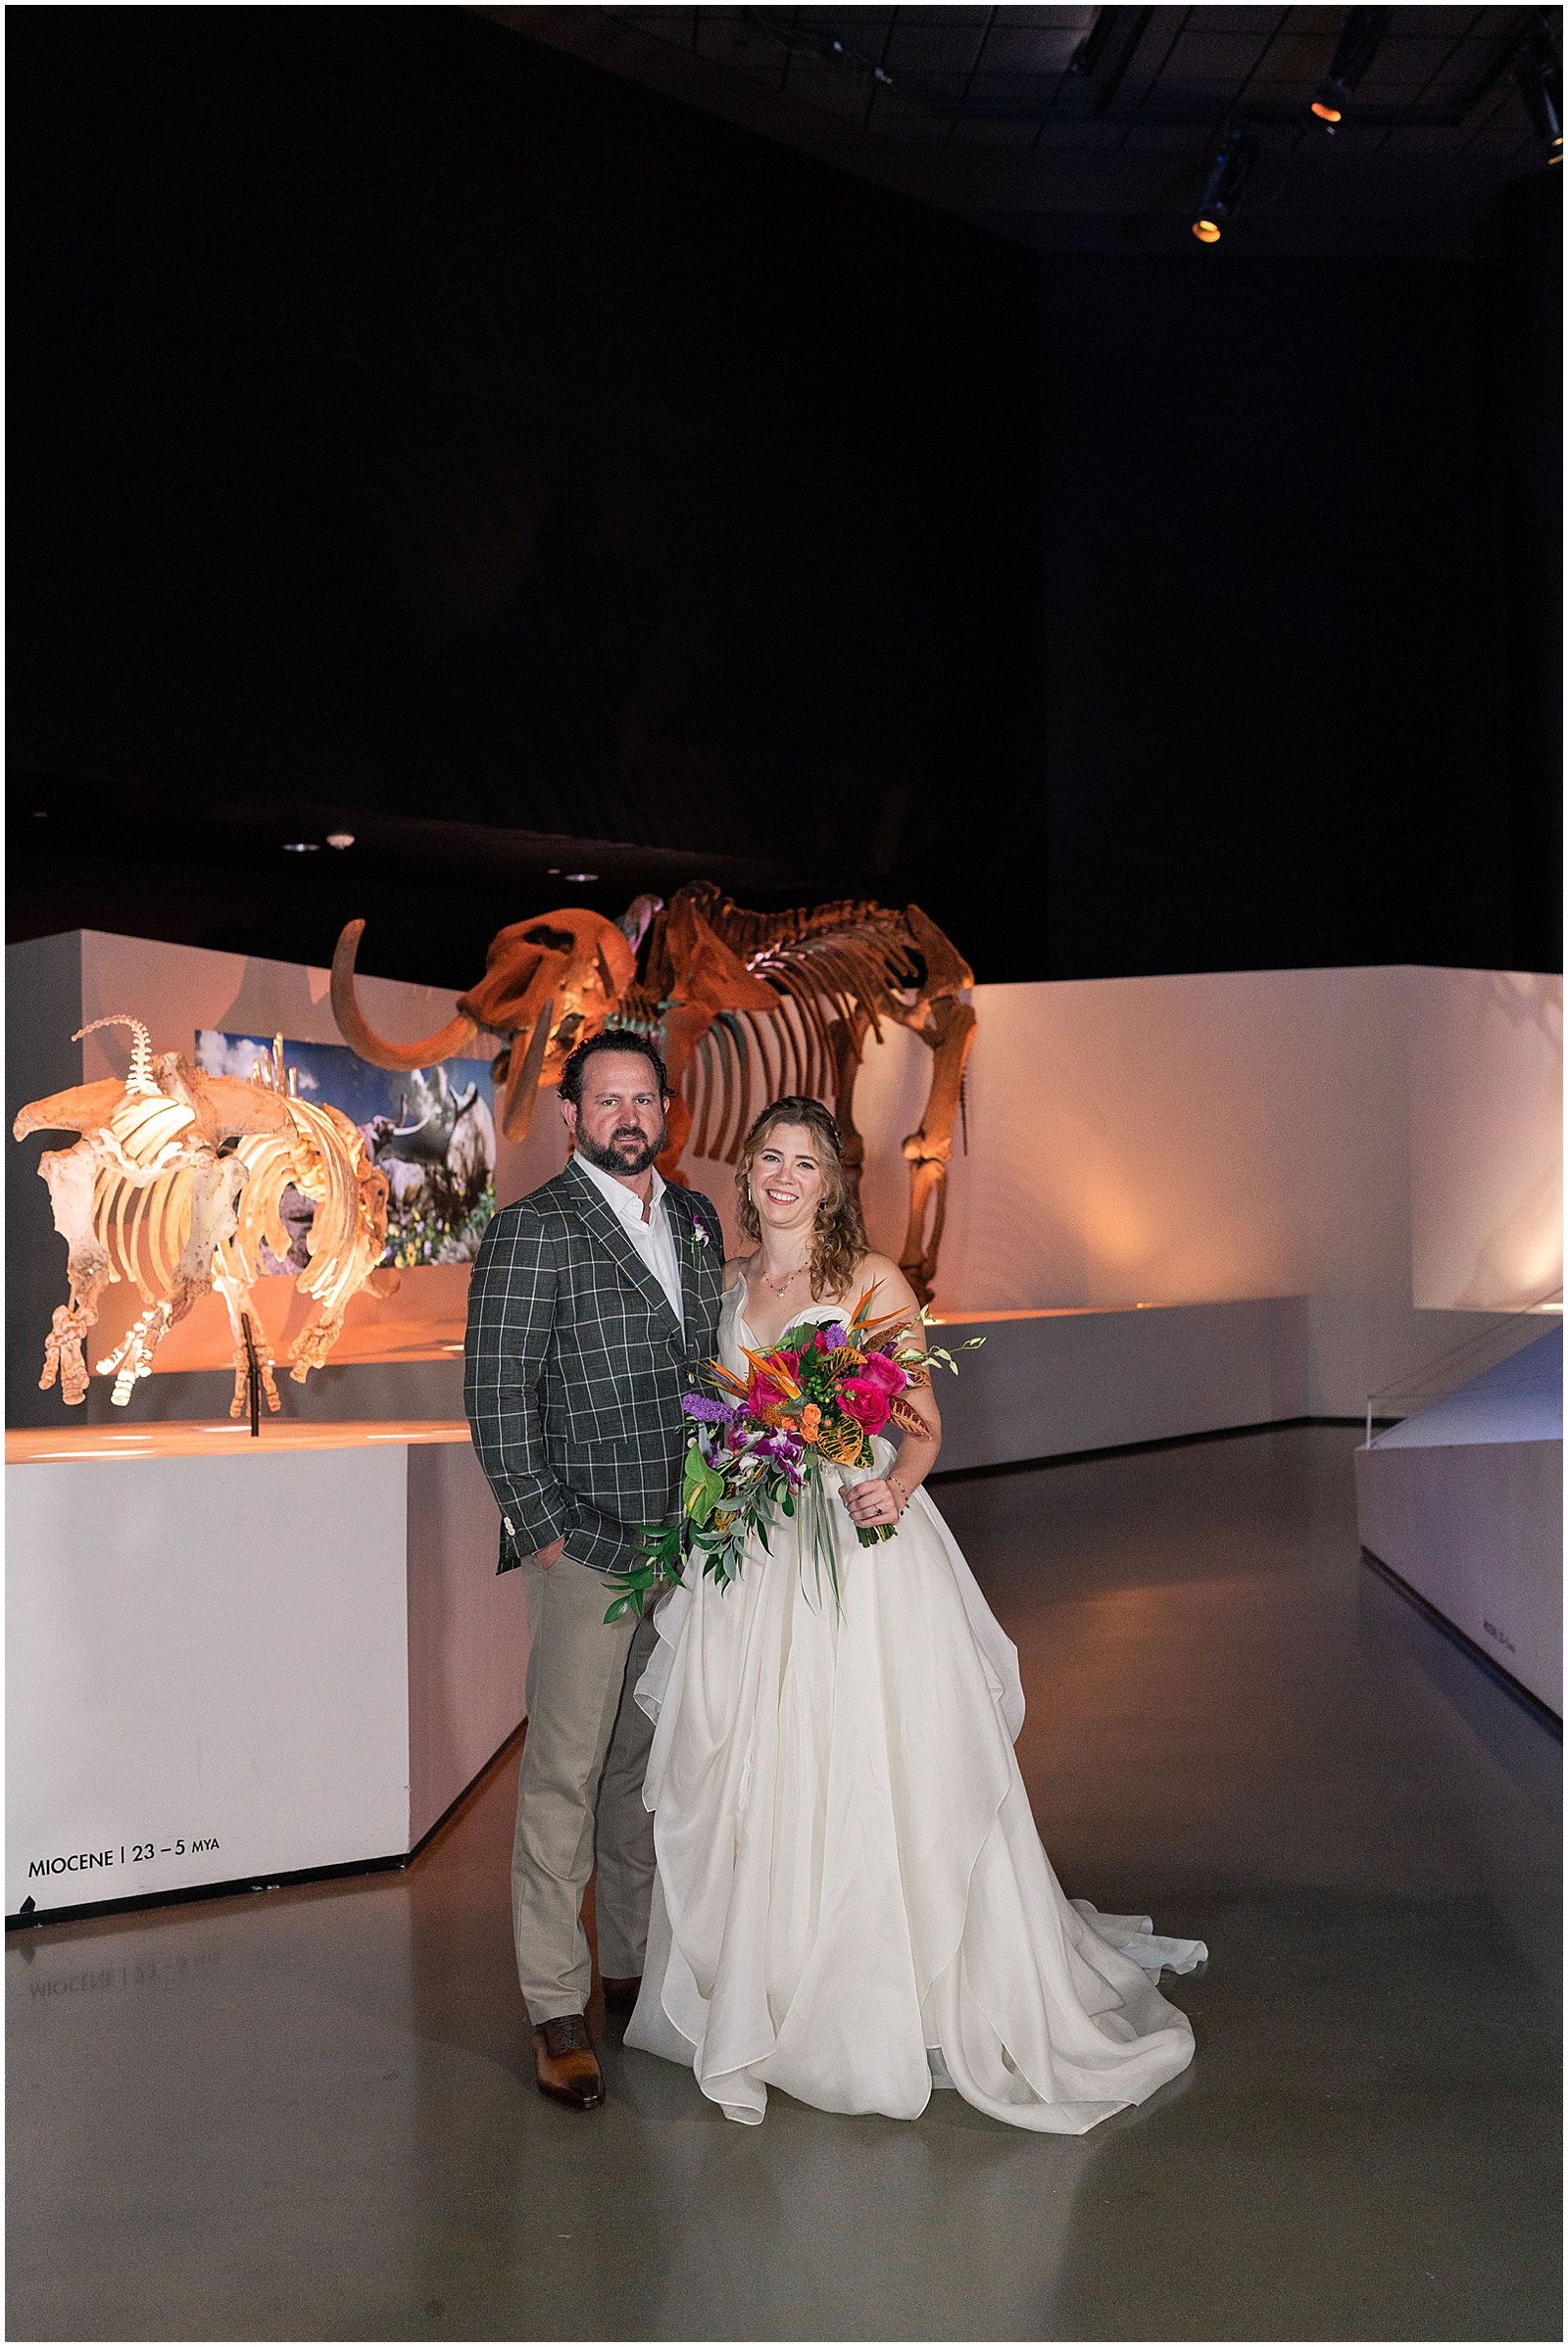 Newlywed portraits with Dinosaurs at The Houston Museum of Natural Science | Swish and Click Photography - Houston Wedding Photographer